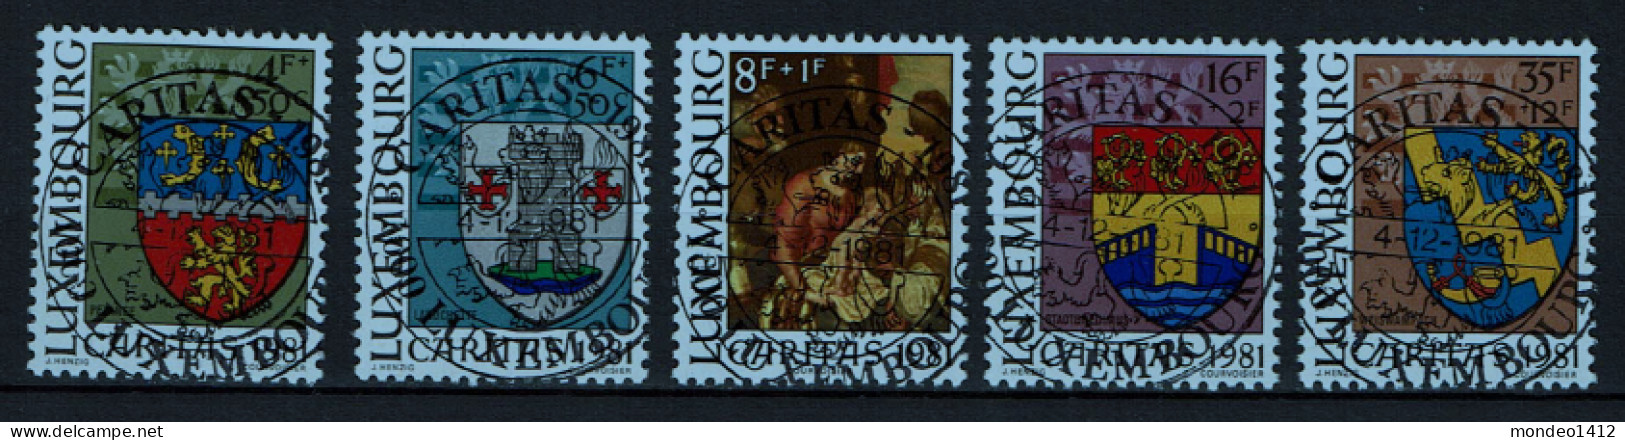 Luxembourg 1981 - YT 991/995 - Town Arms - Caritas Issue, Armoiries Communales, Wappenschilde, Tableau - Used Stamps